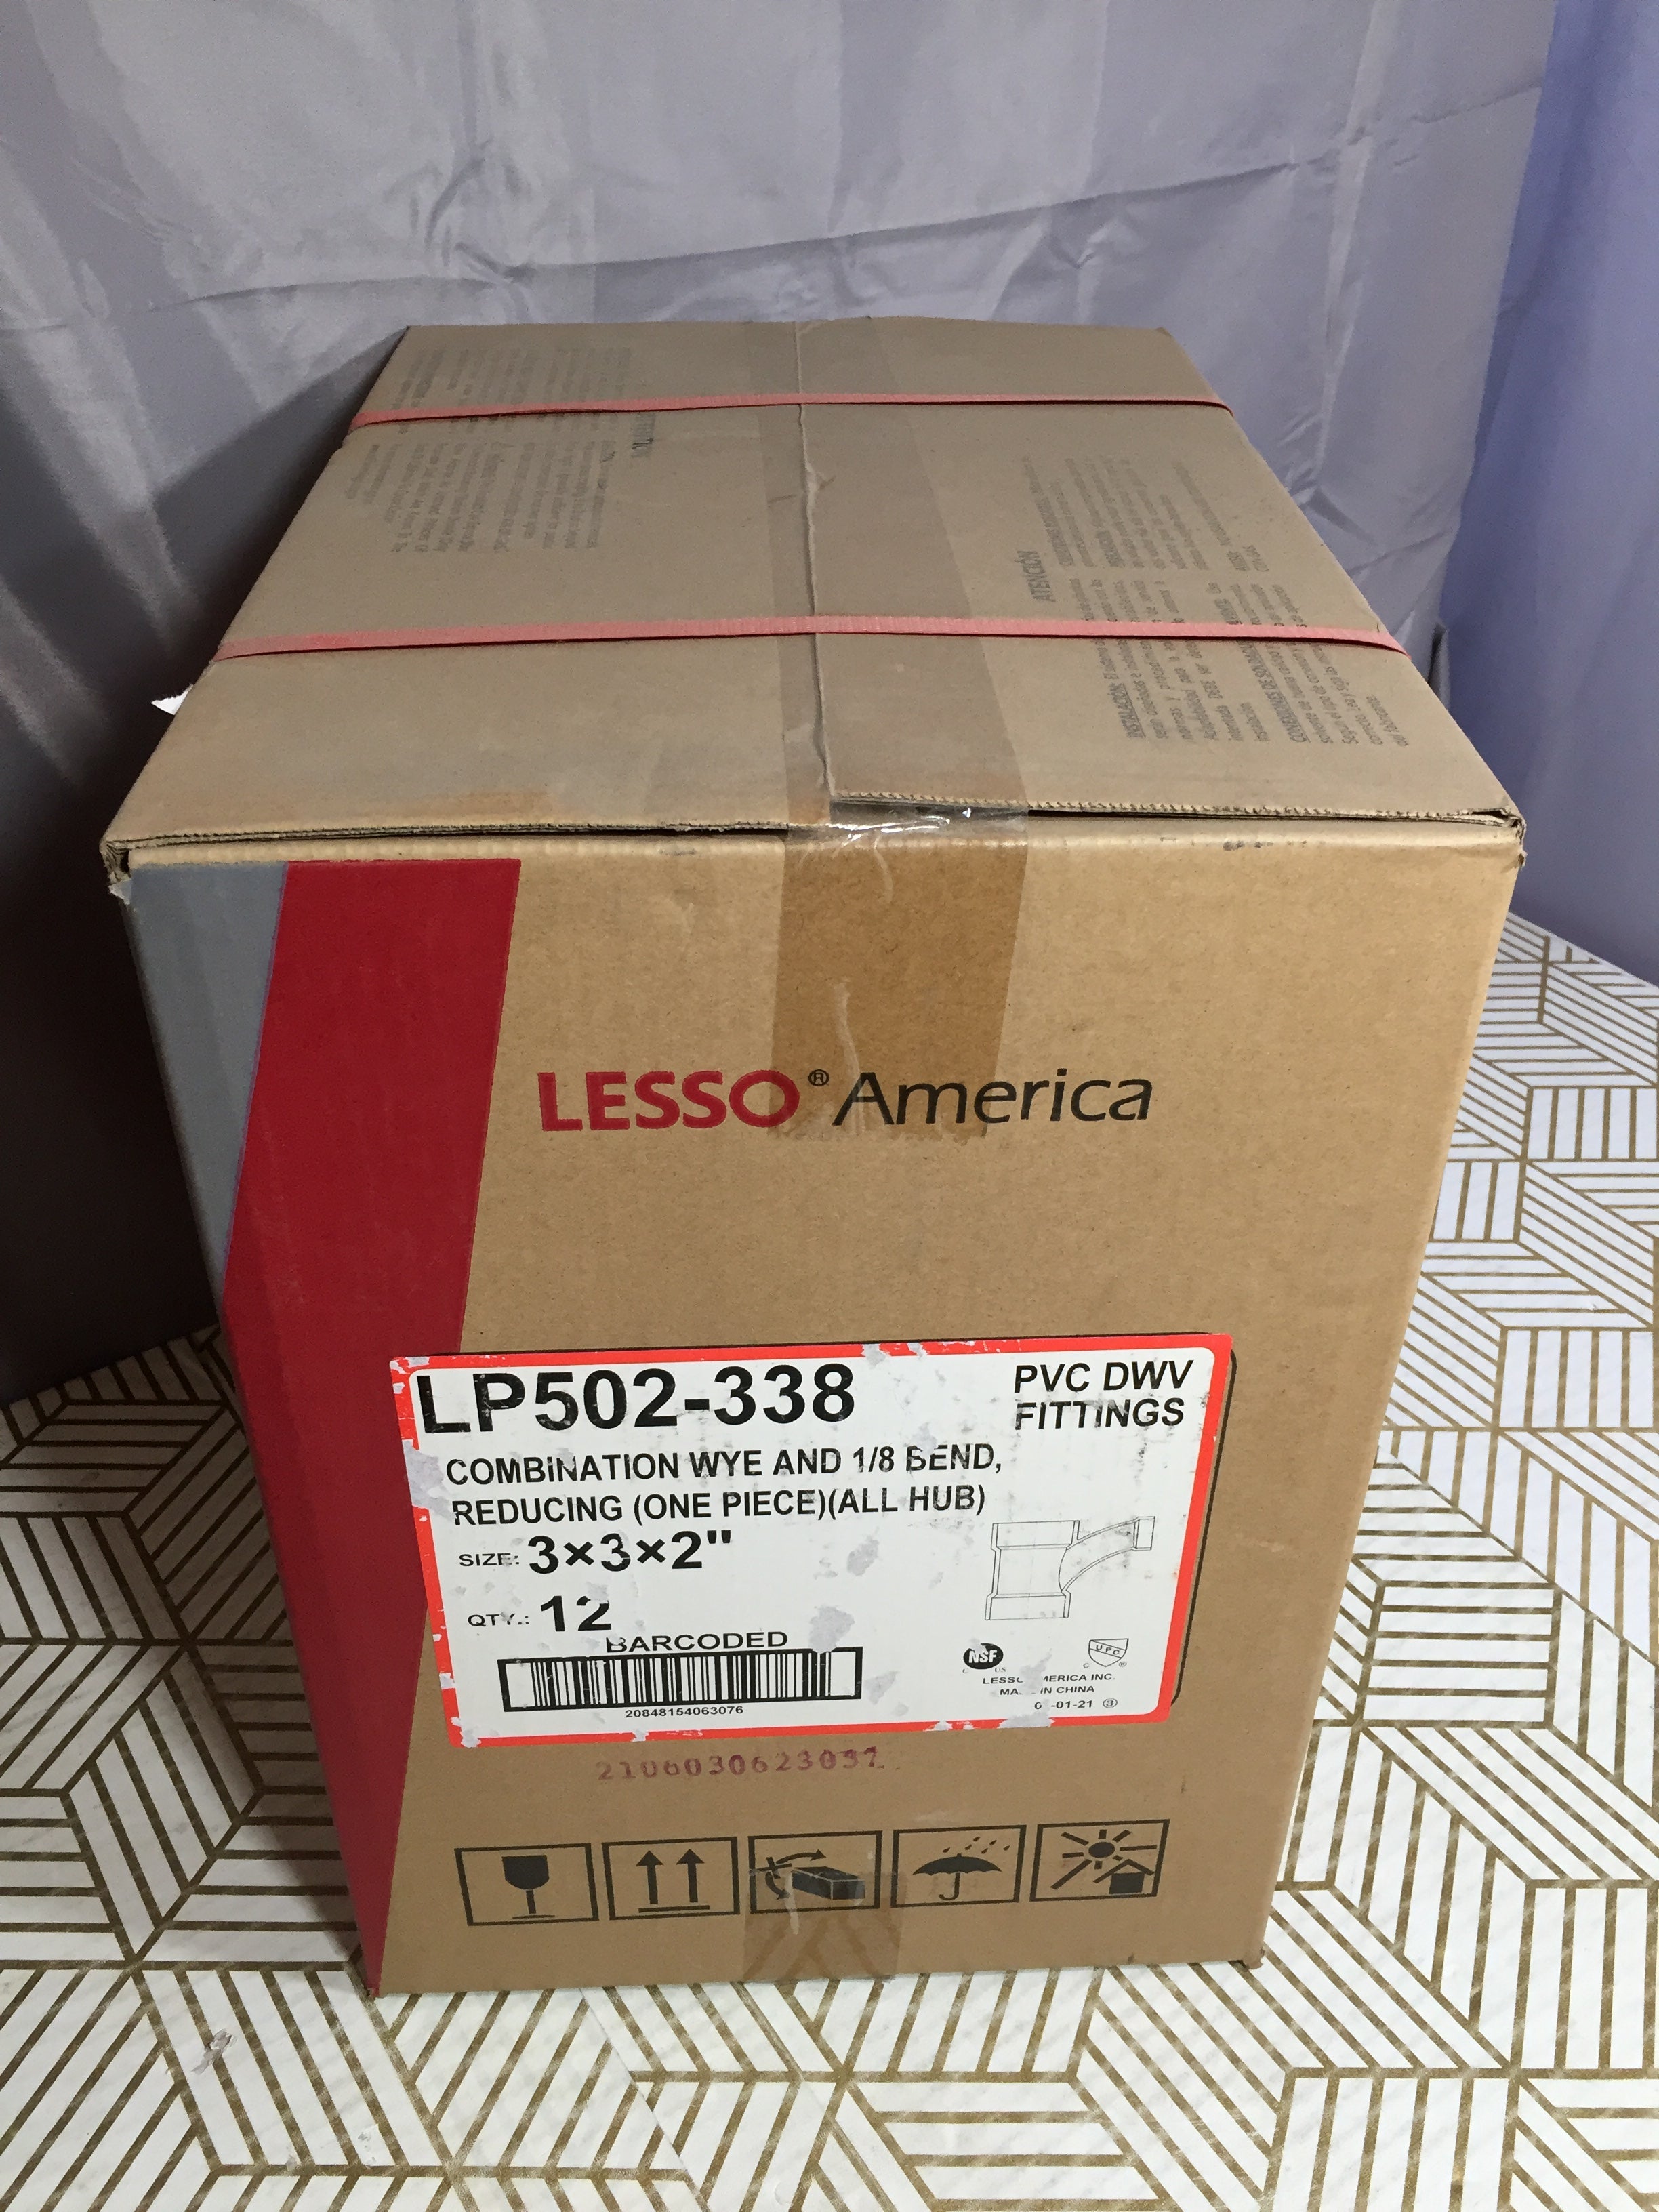 Lesso America Combo WYE & 1/8 Bend, Reducing LP502-338 - 3x3x2